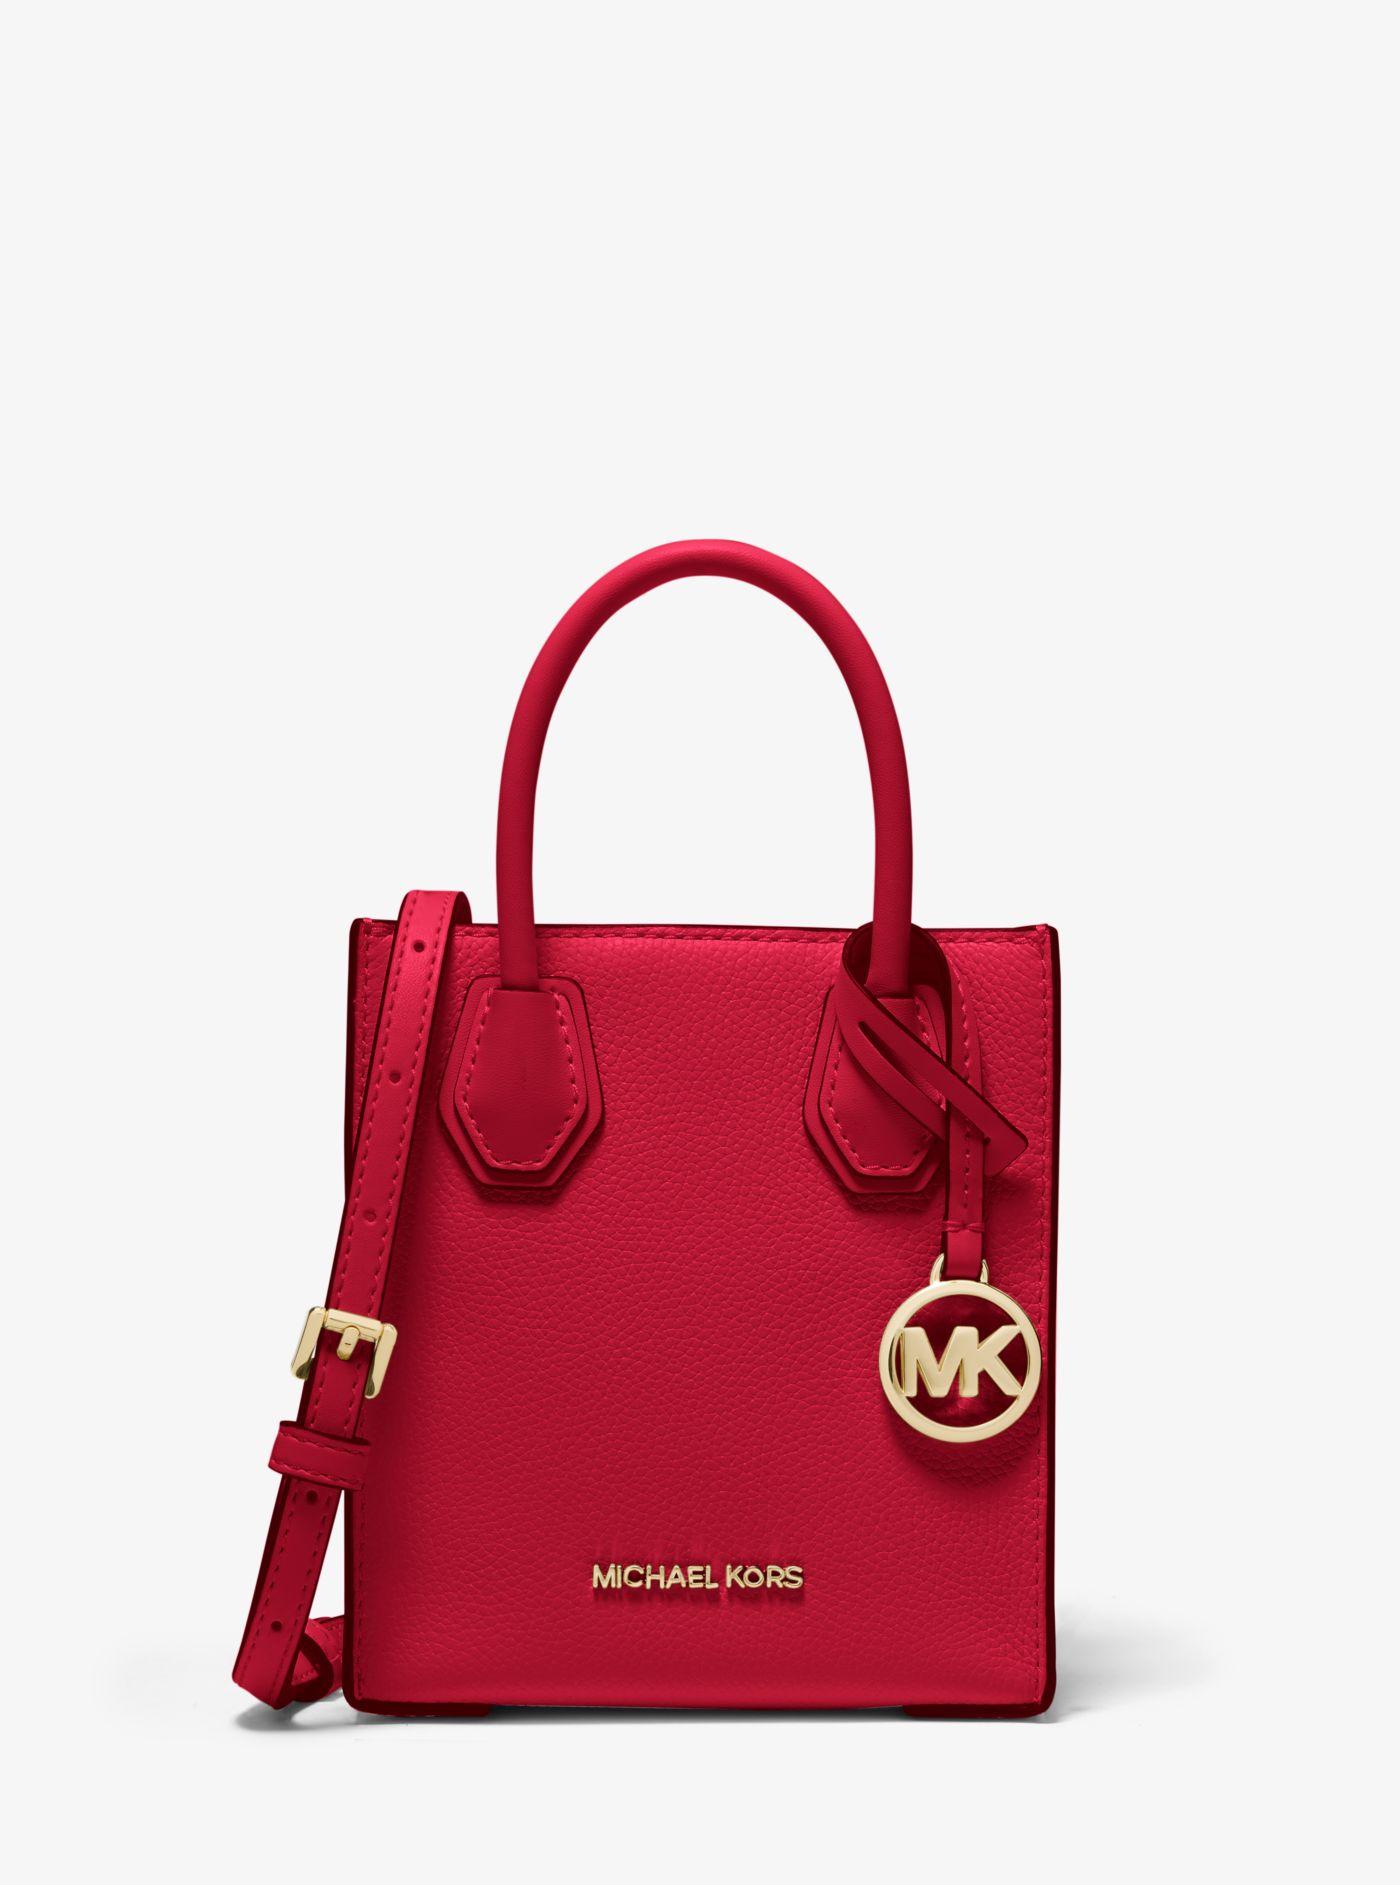 Michael Kors Mercer Extra-small Pebbled Leather Crossbody Bag in Red | Lyst